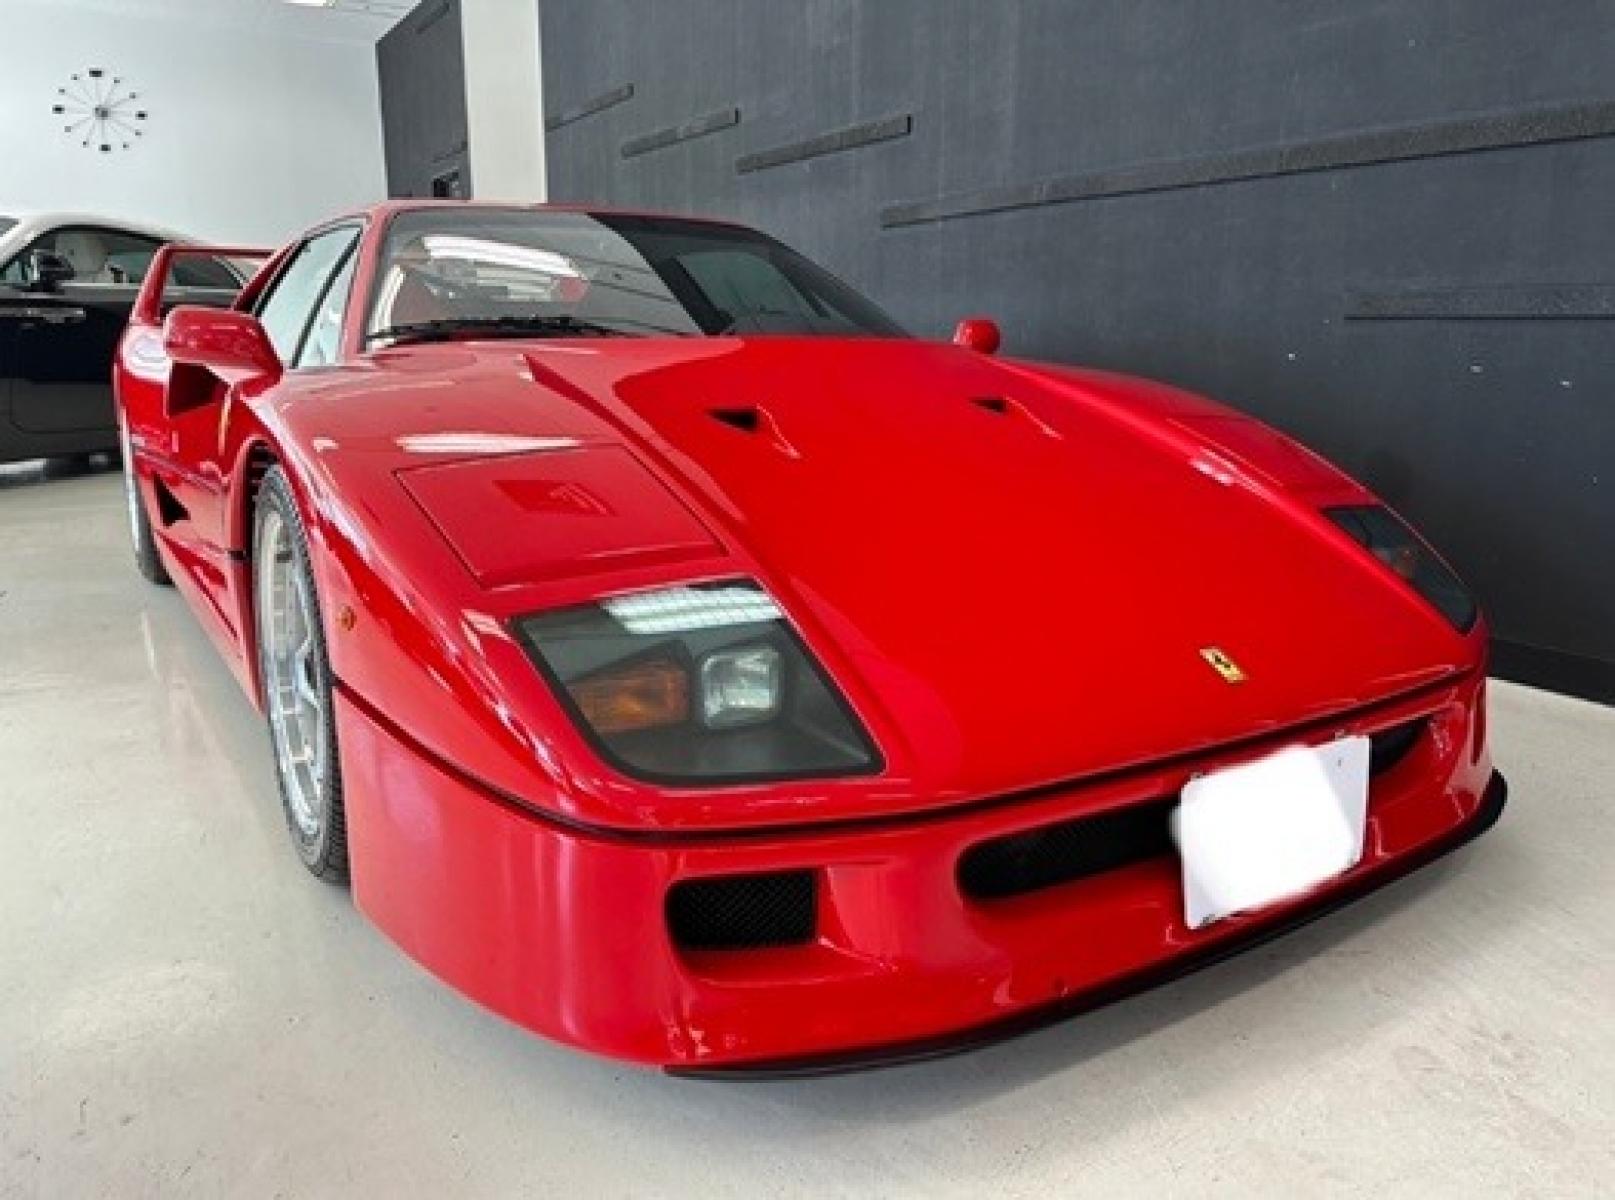 1990 Red Ferrari F40 , 0.000000, 0.000000 - 1990 Ferrari F40 1990 delivered as new in France 1992 delivered to 2nd owner in Japan from France. 2003 current owner All service record from present owner All repaint for refresh perfect skill Exchanged new cutch and master last month, was reupholstered both of the seat new fabric and spong - Photo #0